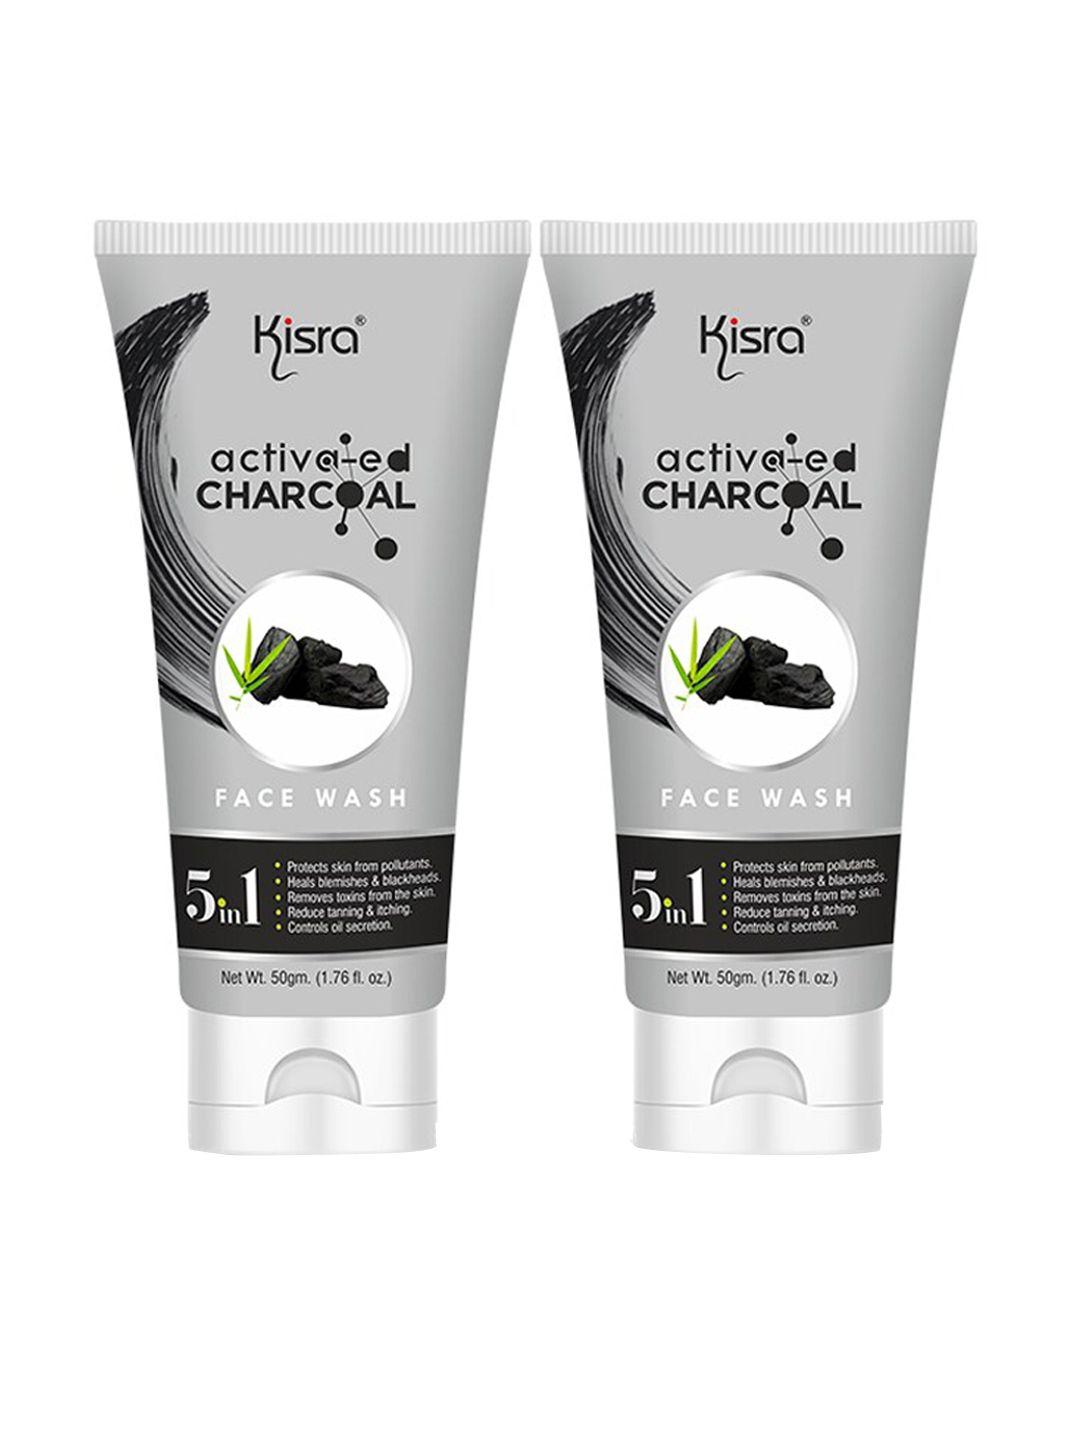 kisra set of 2 activated charcoal face wash - 50g each